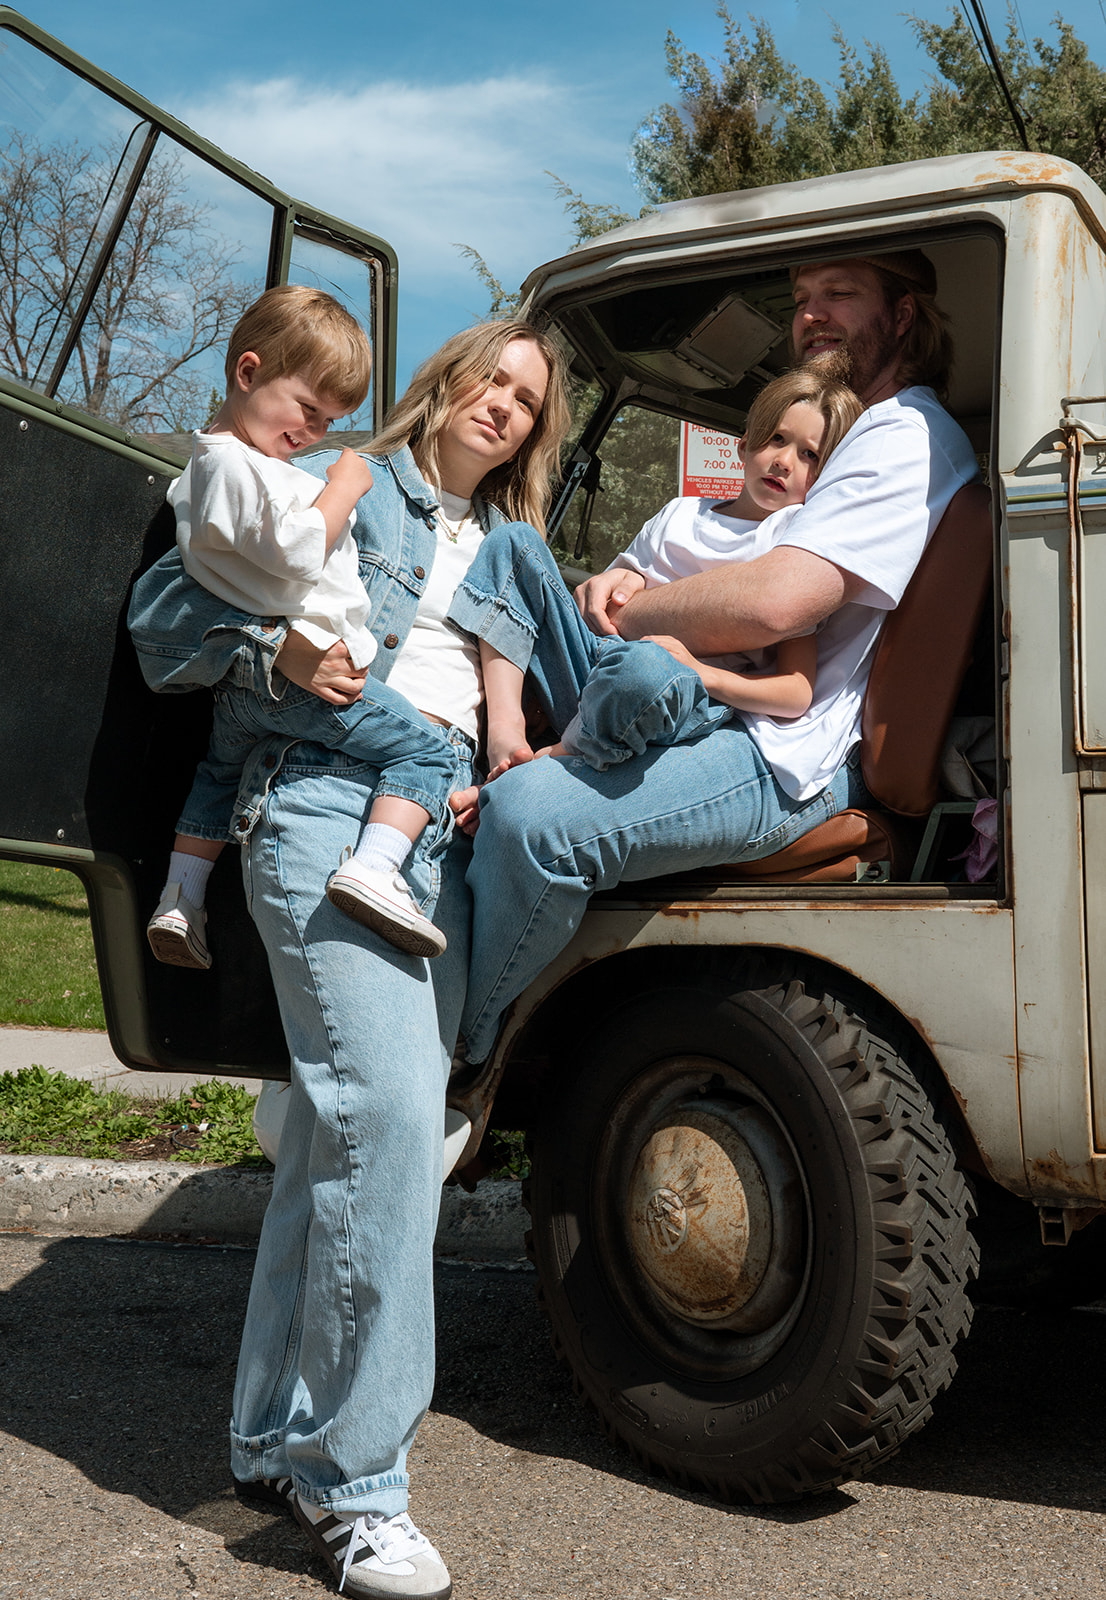 family of 4 sits together in VW truck in Provo Utah